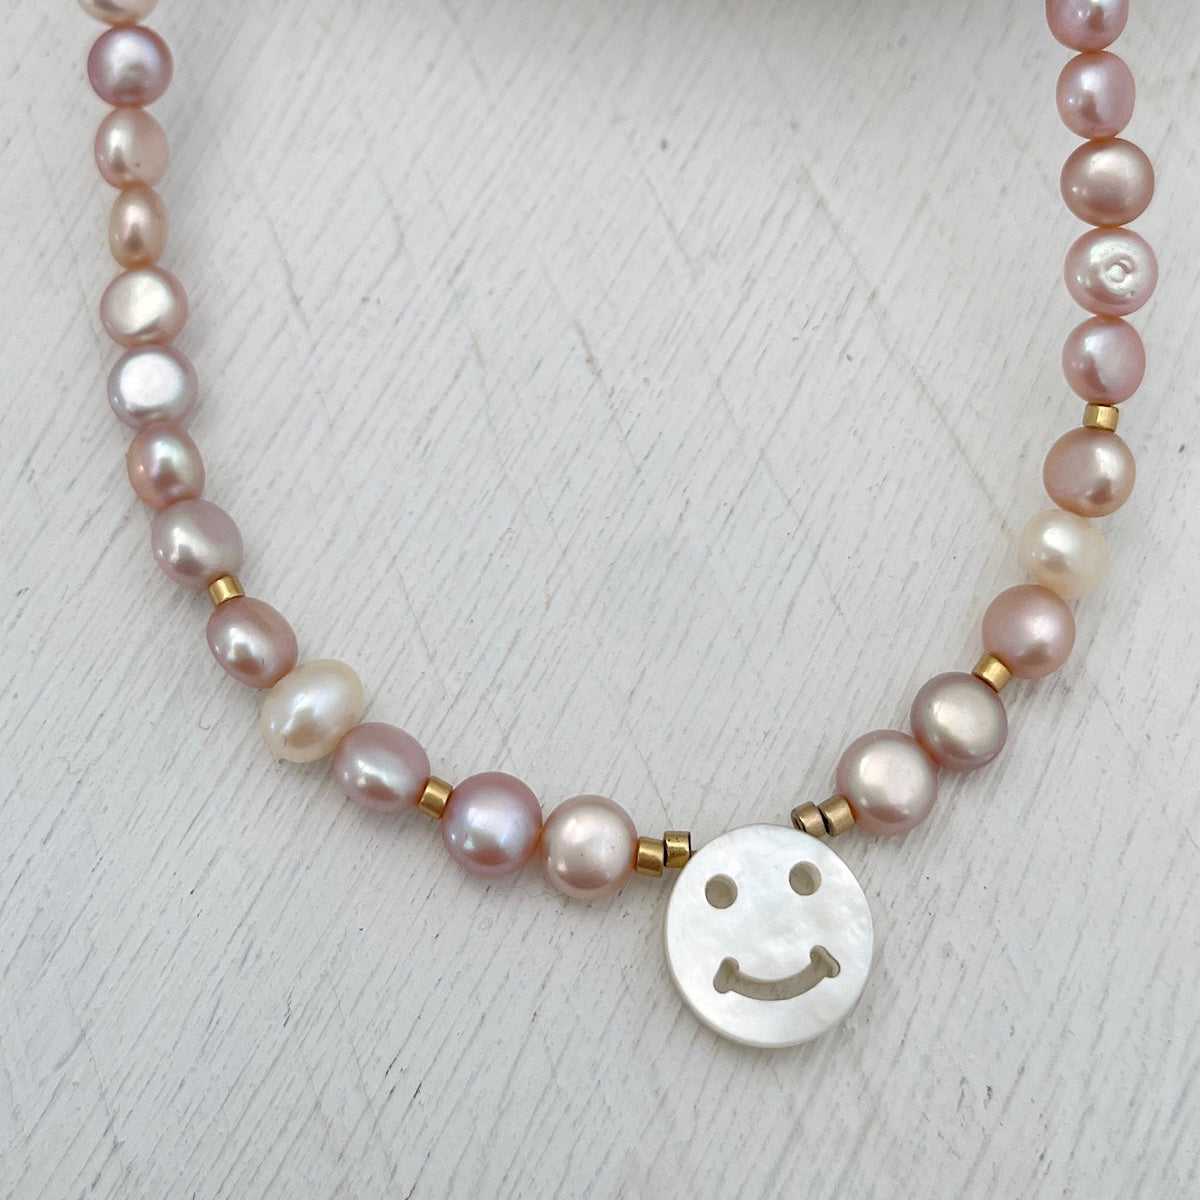 Smiley Face Pearl Choker Necklace